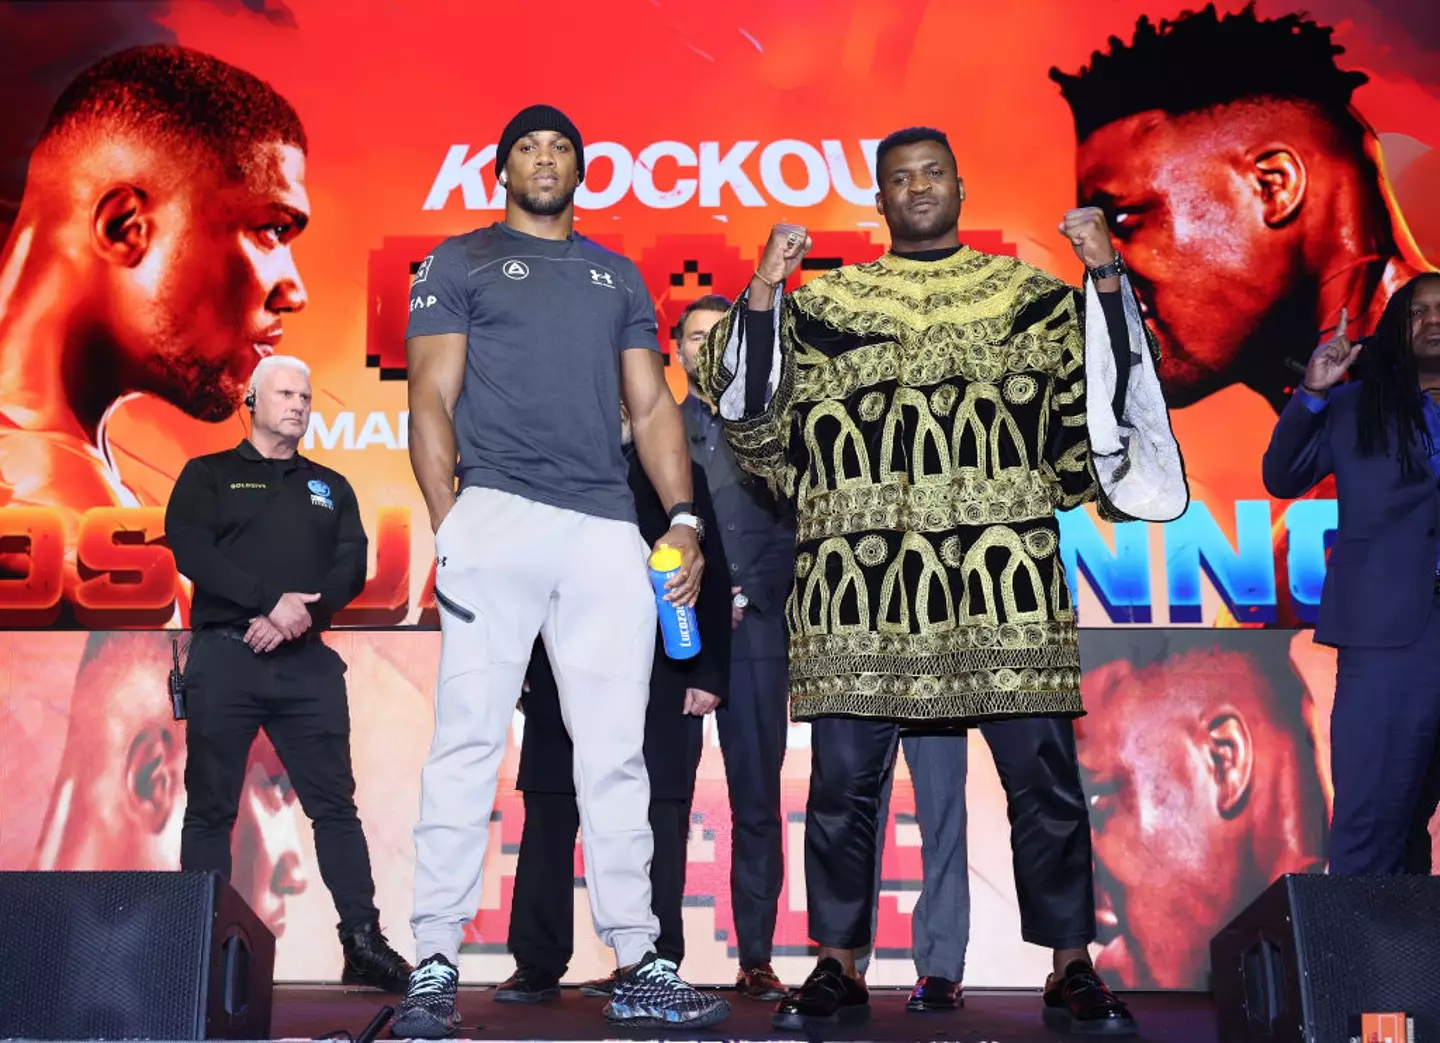 Anthony Joshua will take on Francis Ngannou in Saudi Arabia on March 8.